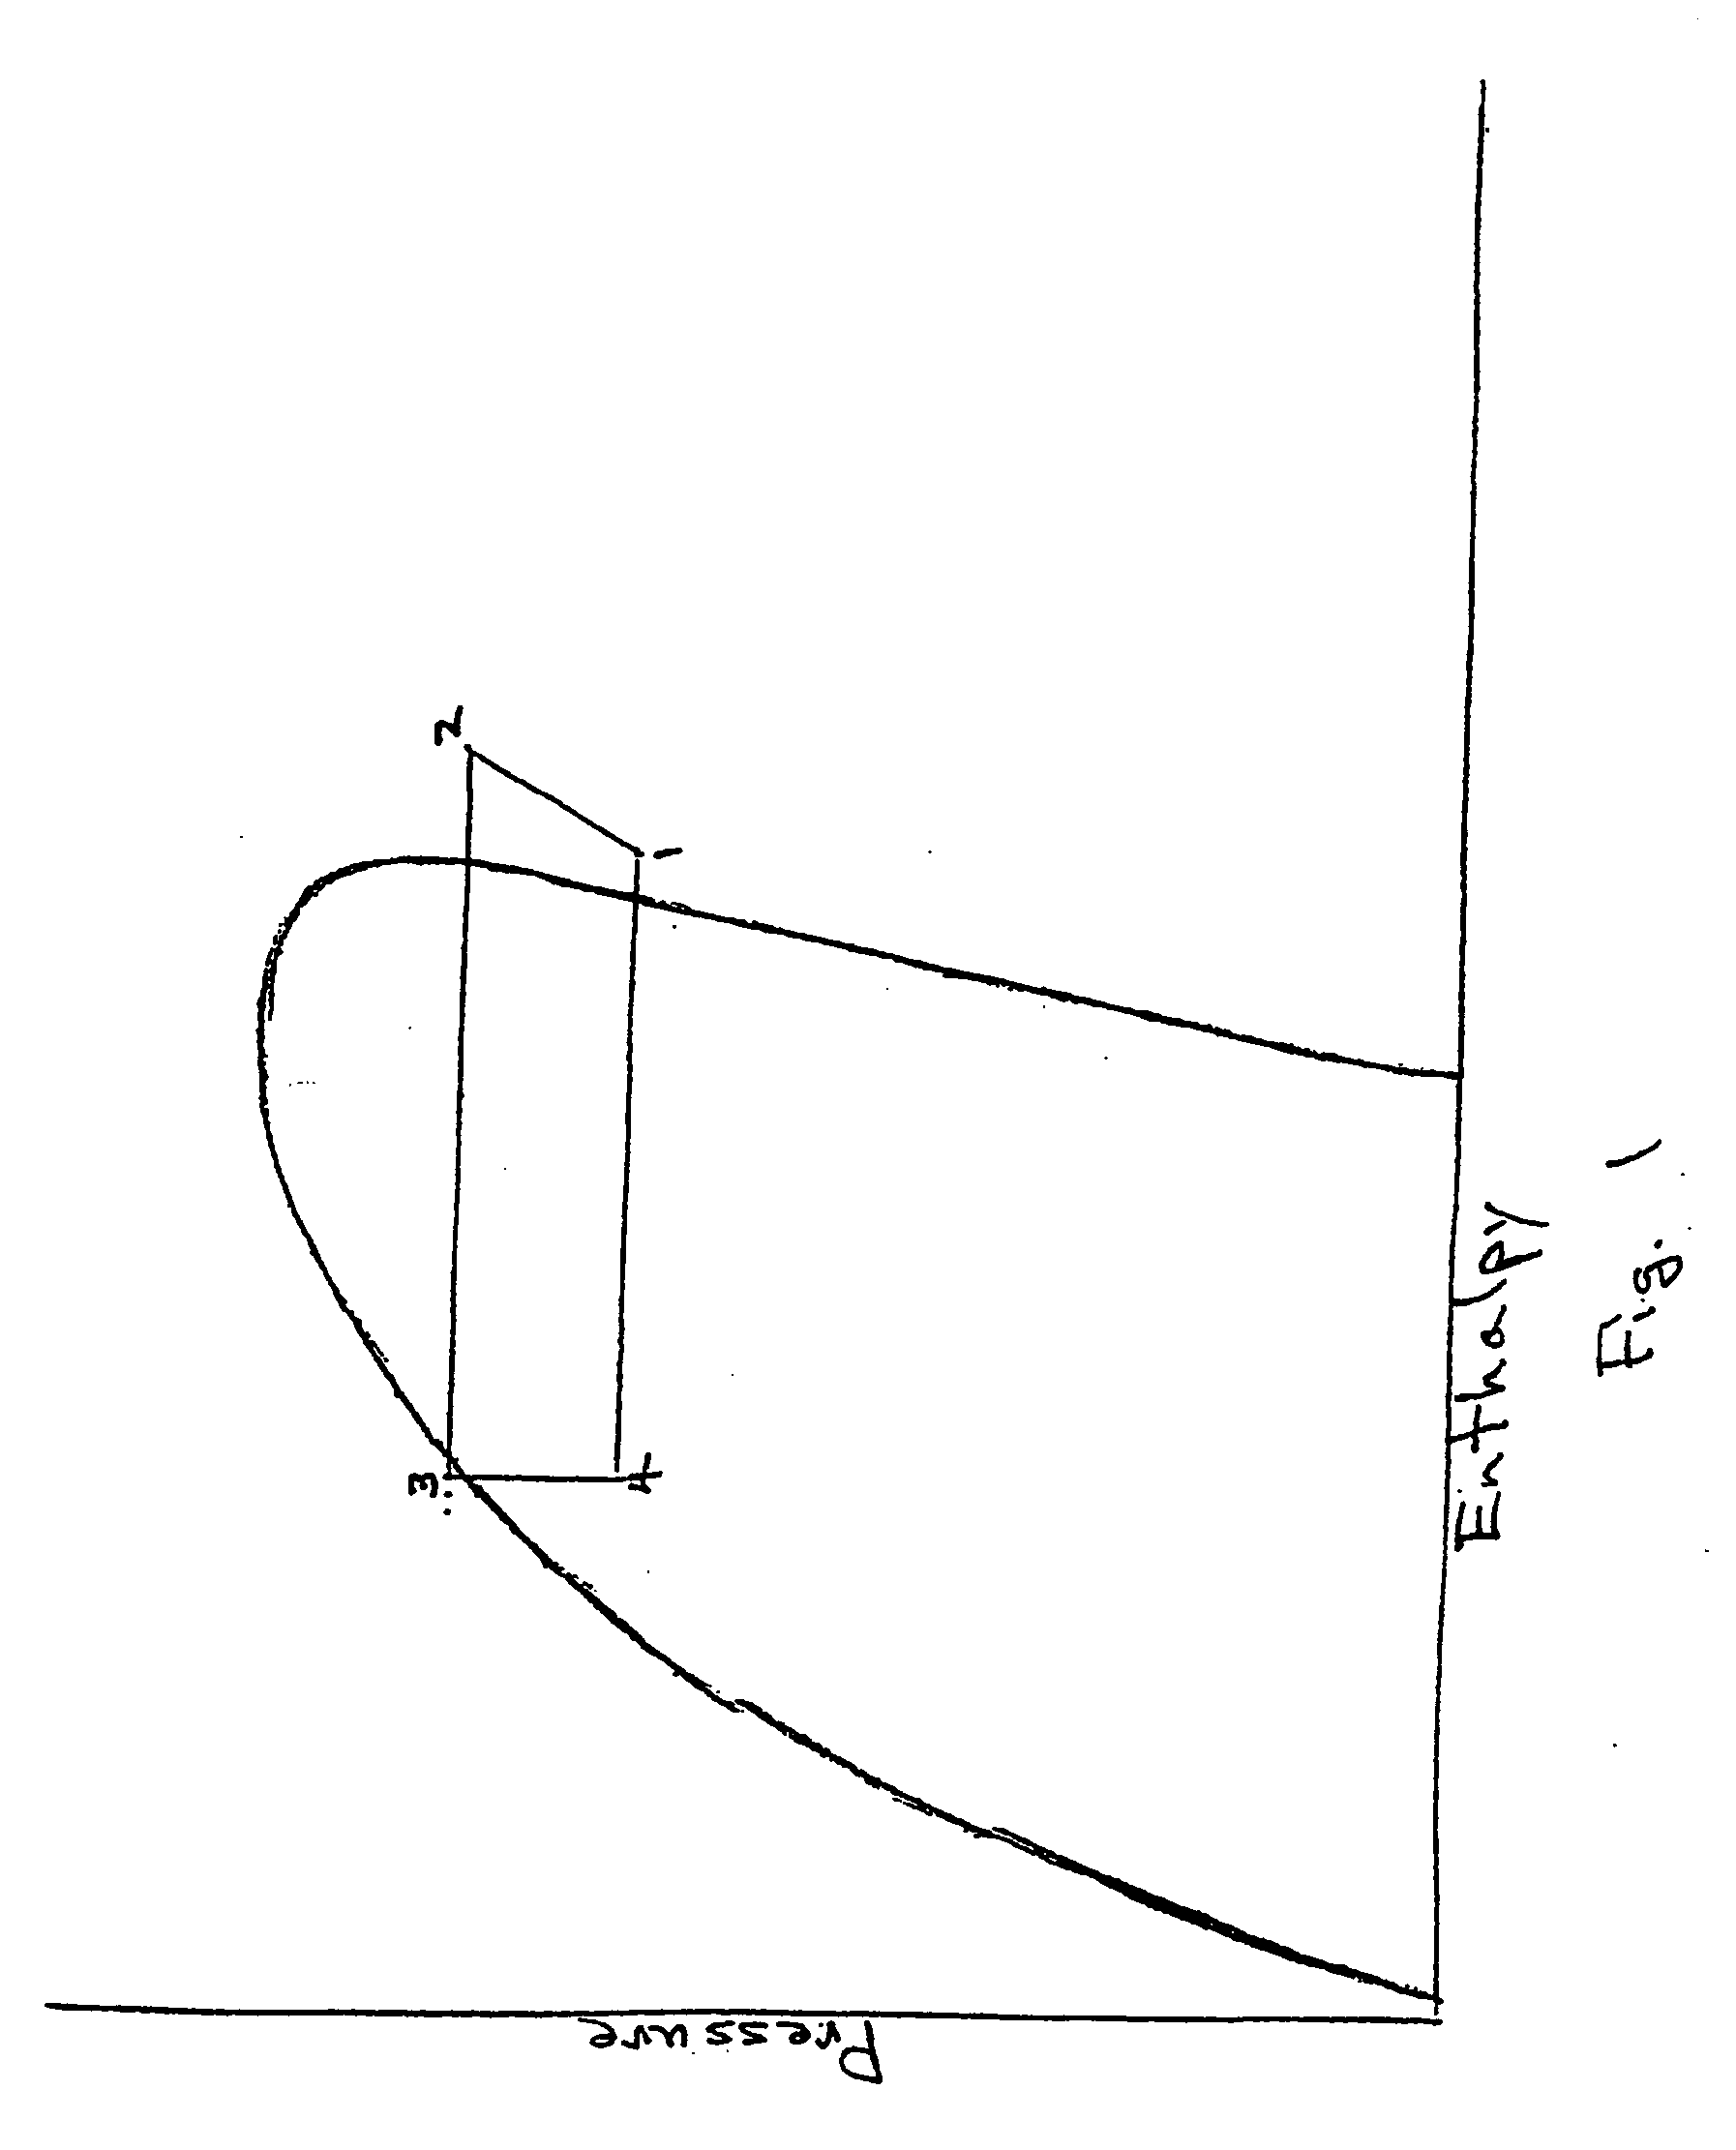 Building exhaust and air conditioner condensate (and/or other water source) evaporative refrigerant subcool/precool system and method therefor